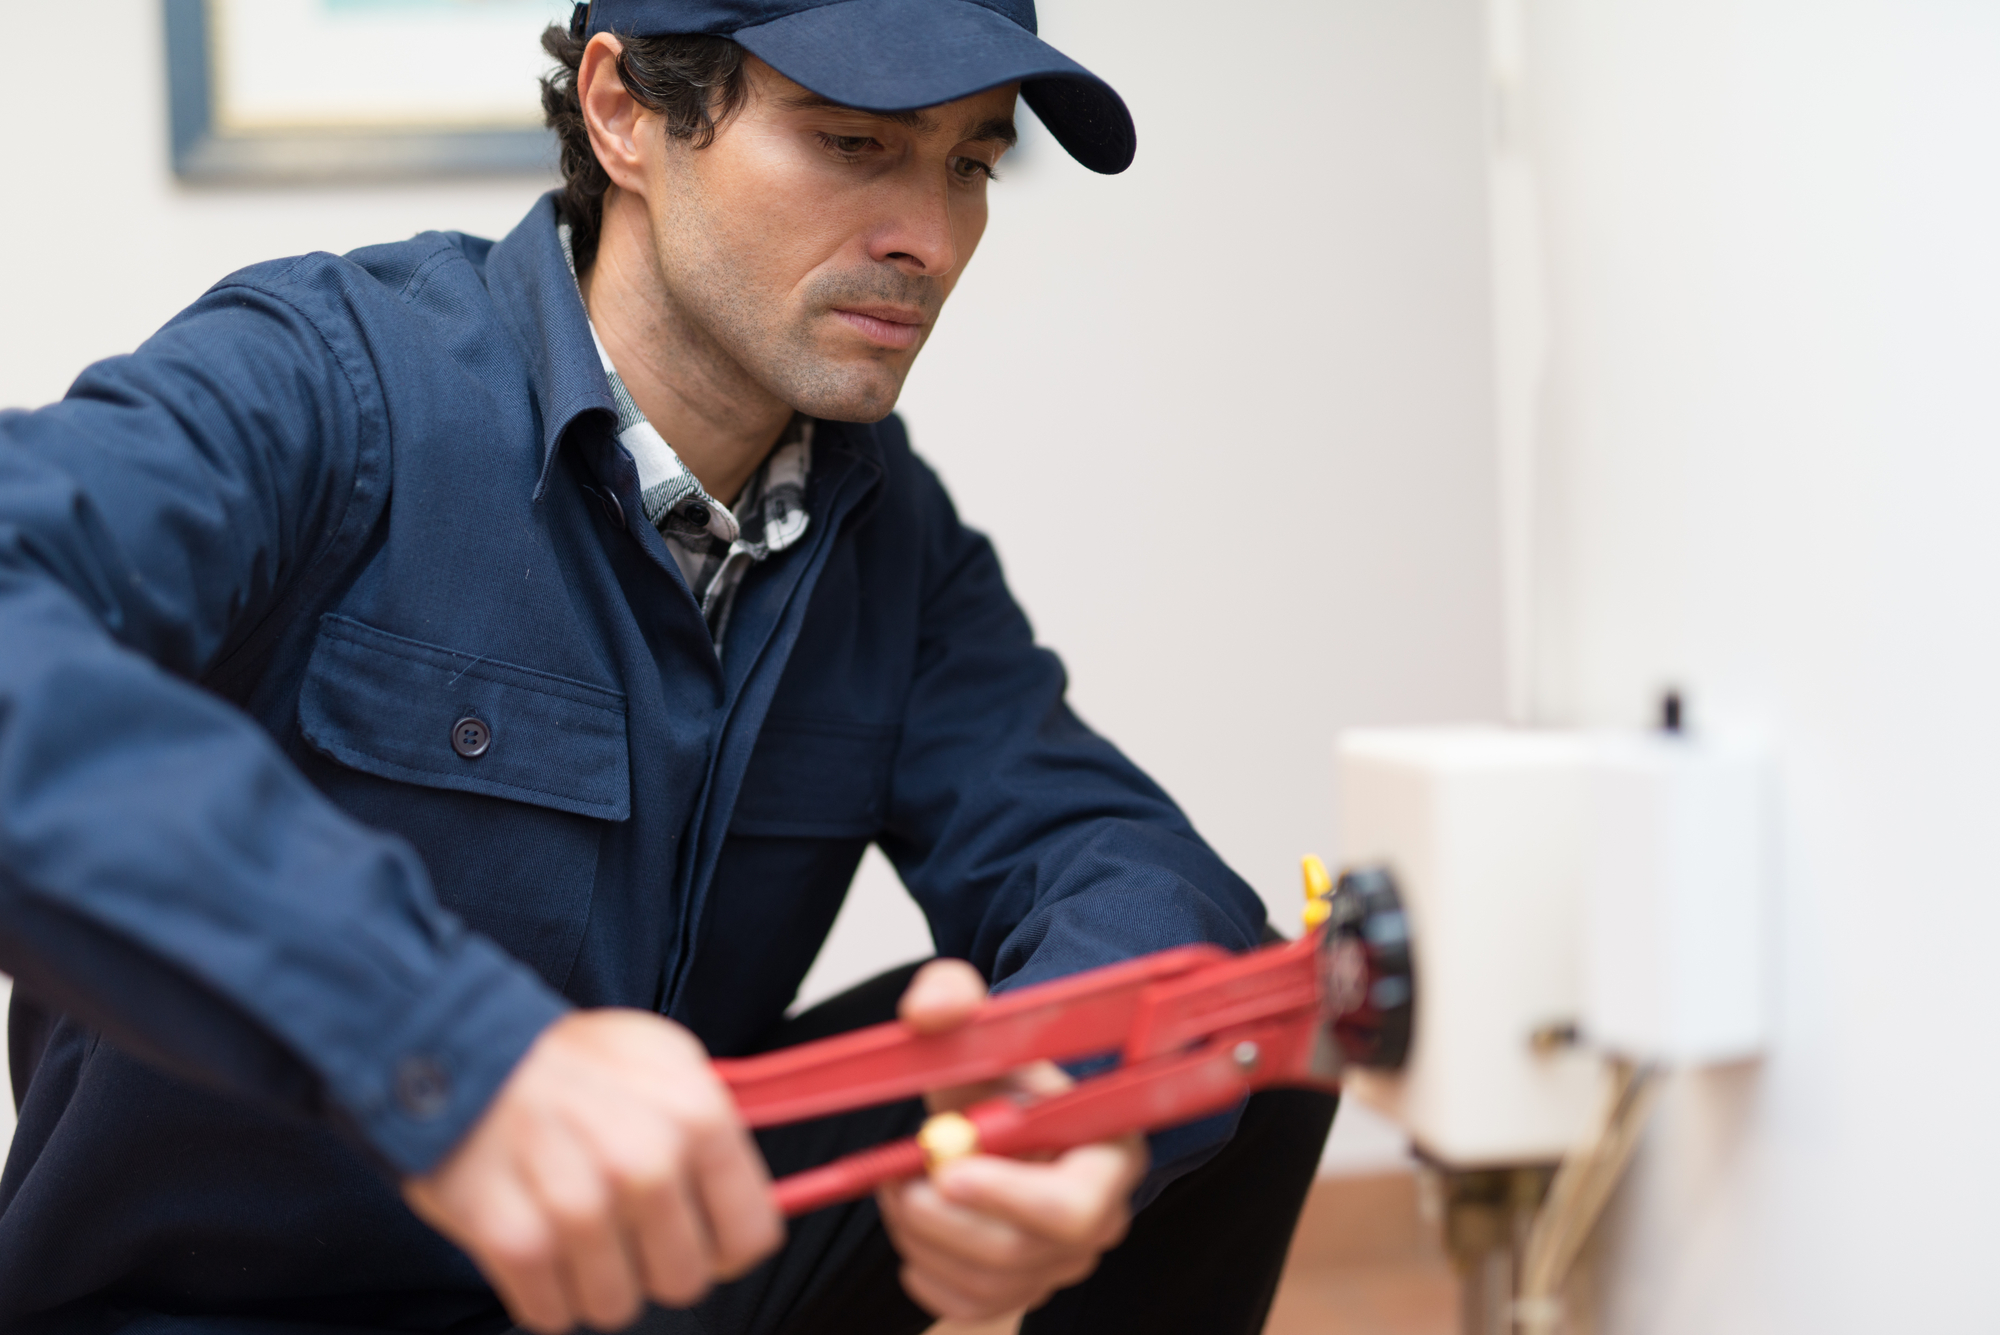 5 Common Water Heater Issues | American Water and Plumbing